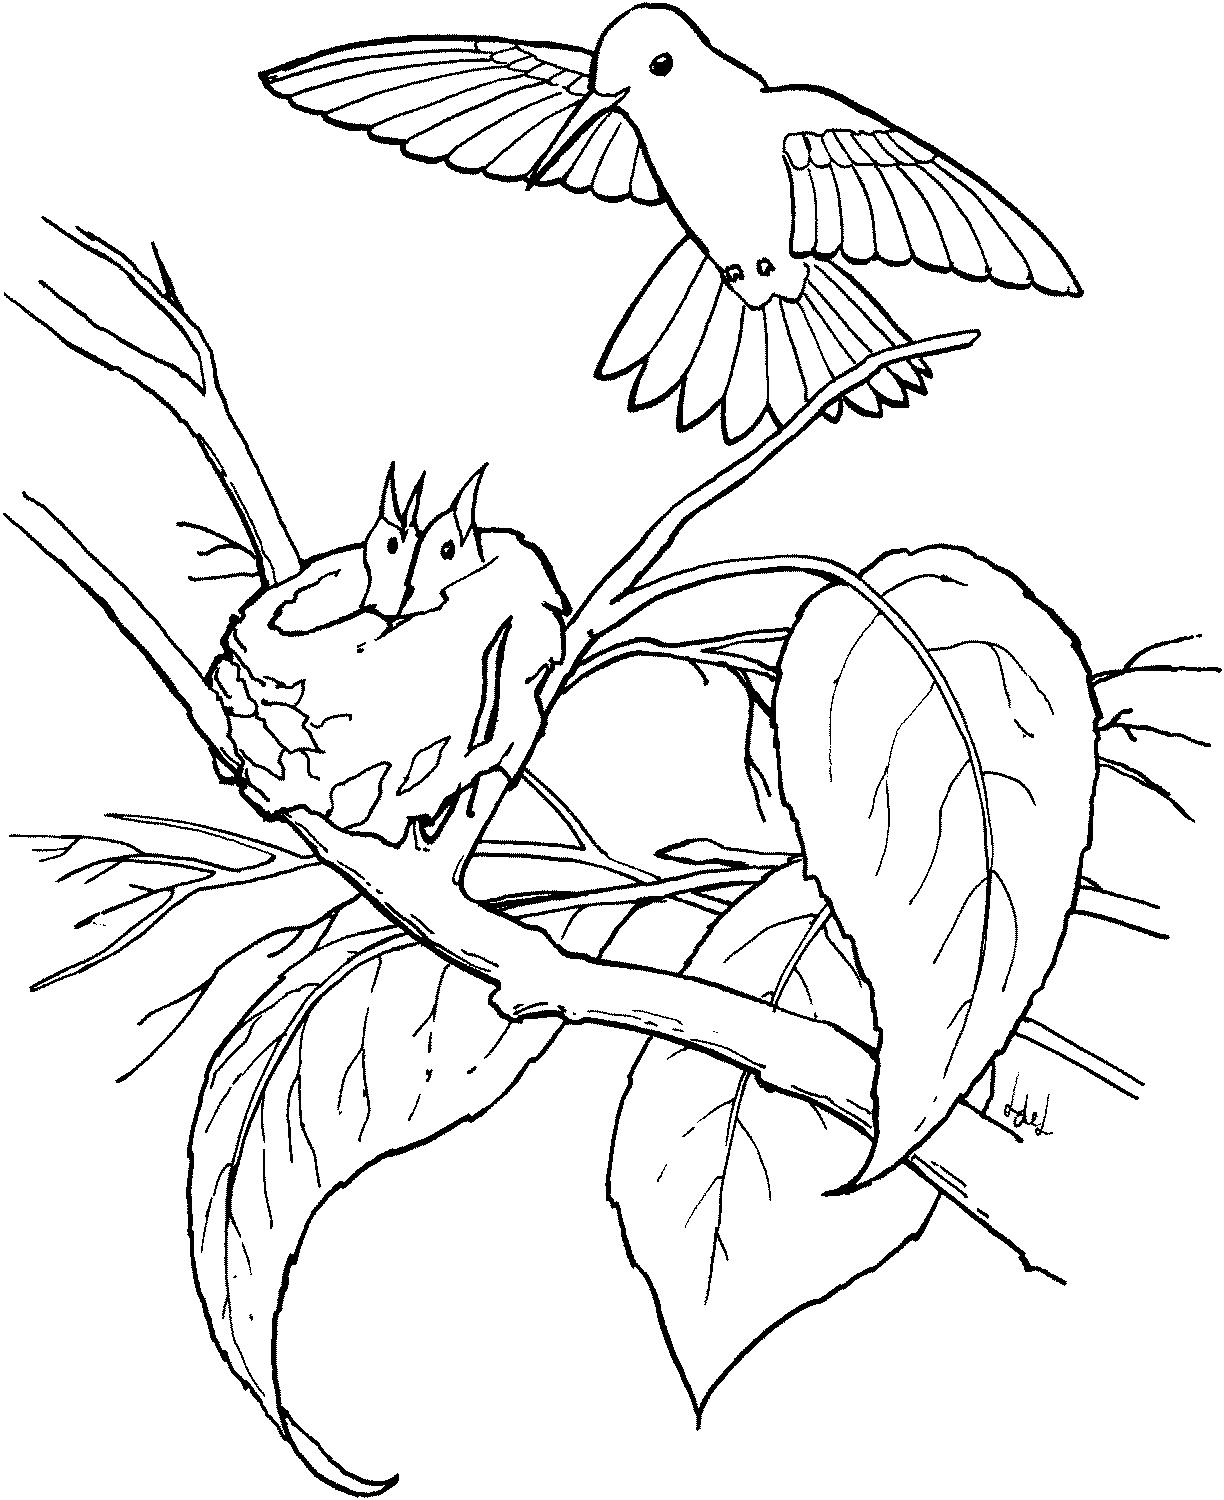 Easy Hummingbird Coloring Pages